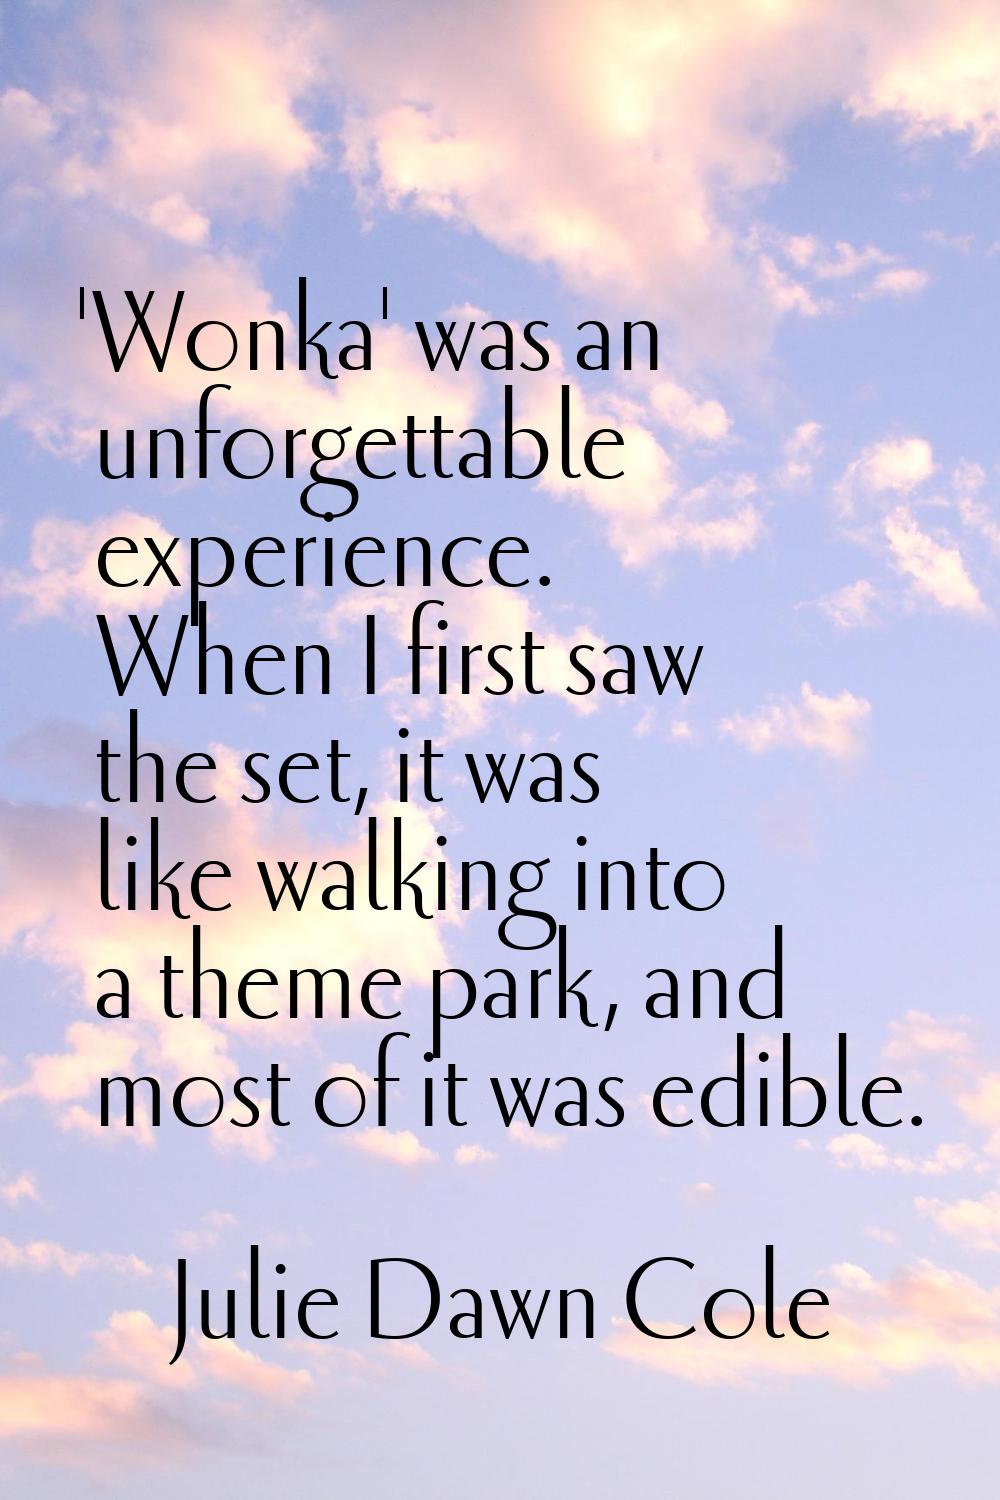 'Wonka' was an unforgettable experience. When I first saw the set, it was like walking into a theme